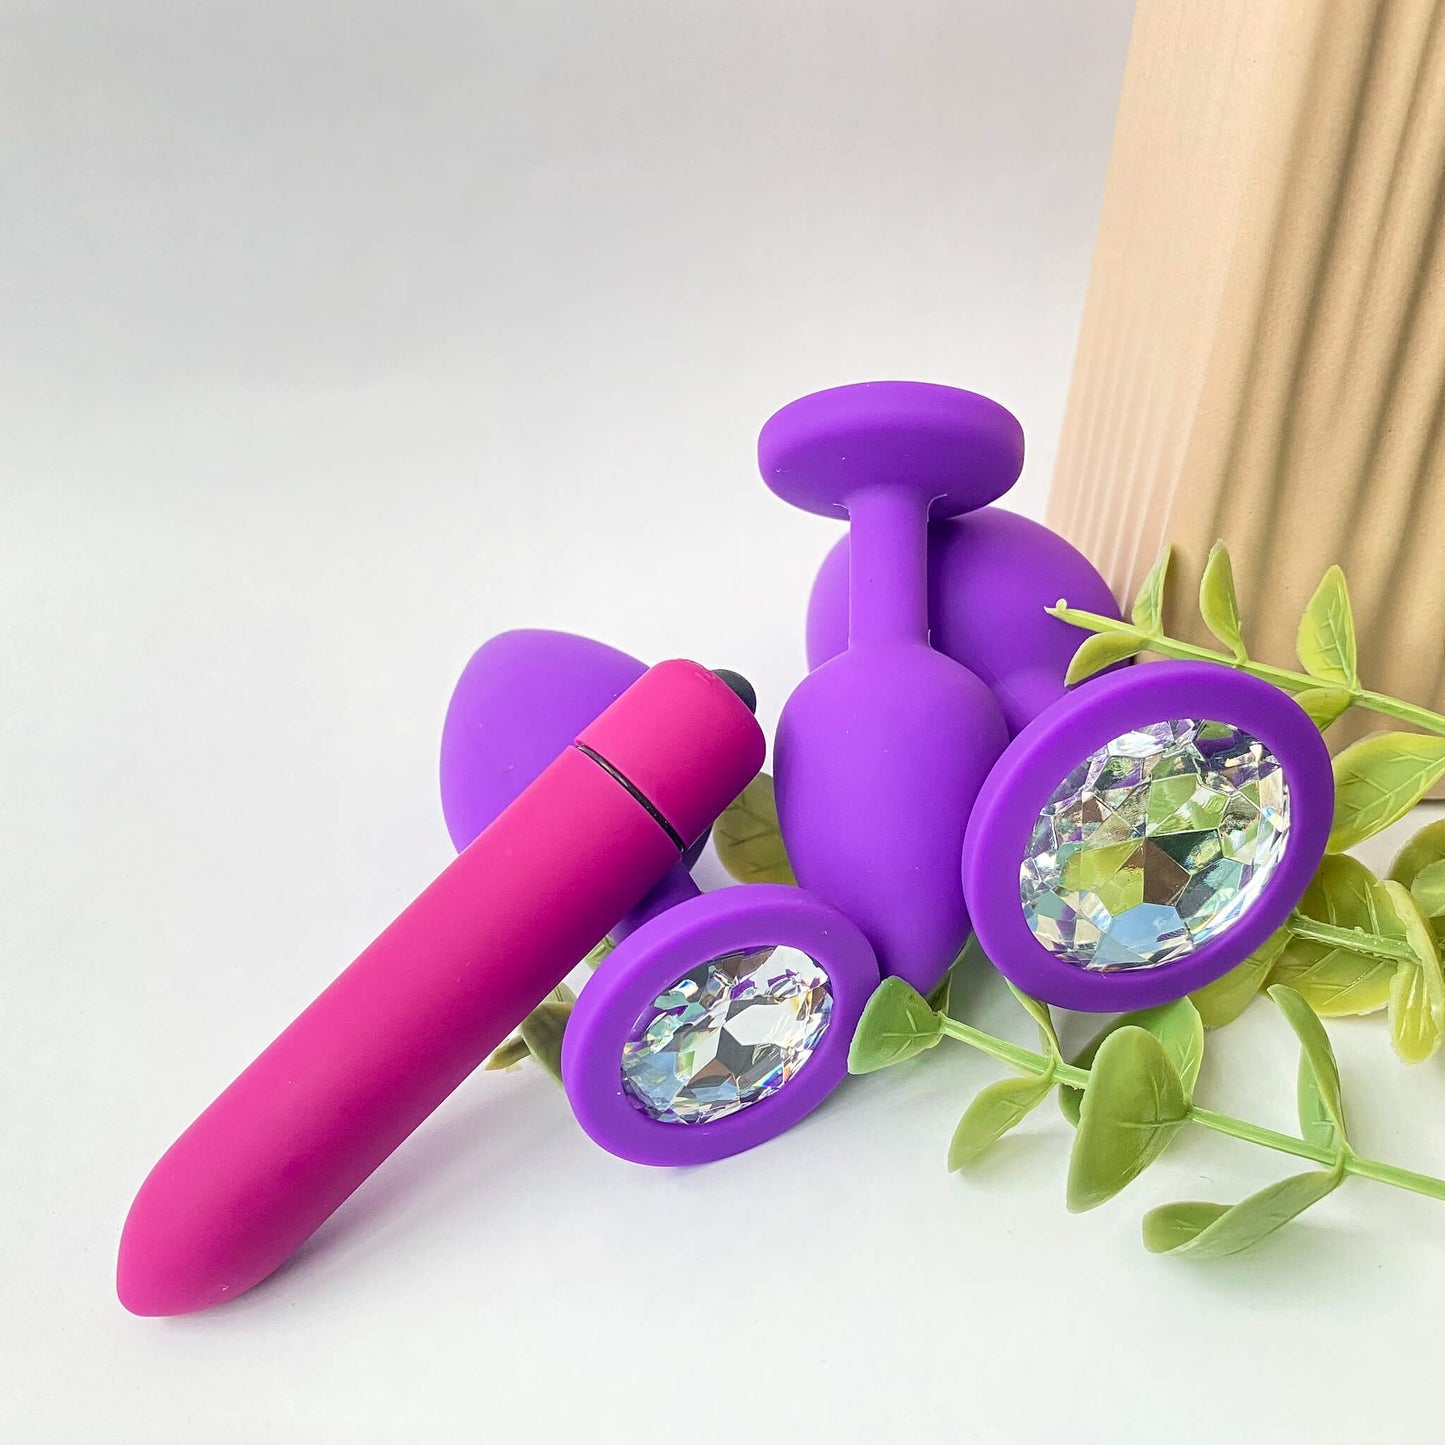 Silicone Butt Plugs & Vibrating Bullet Set